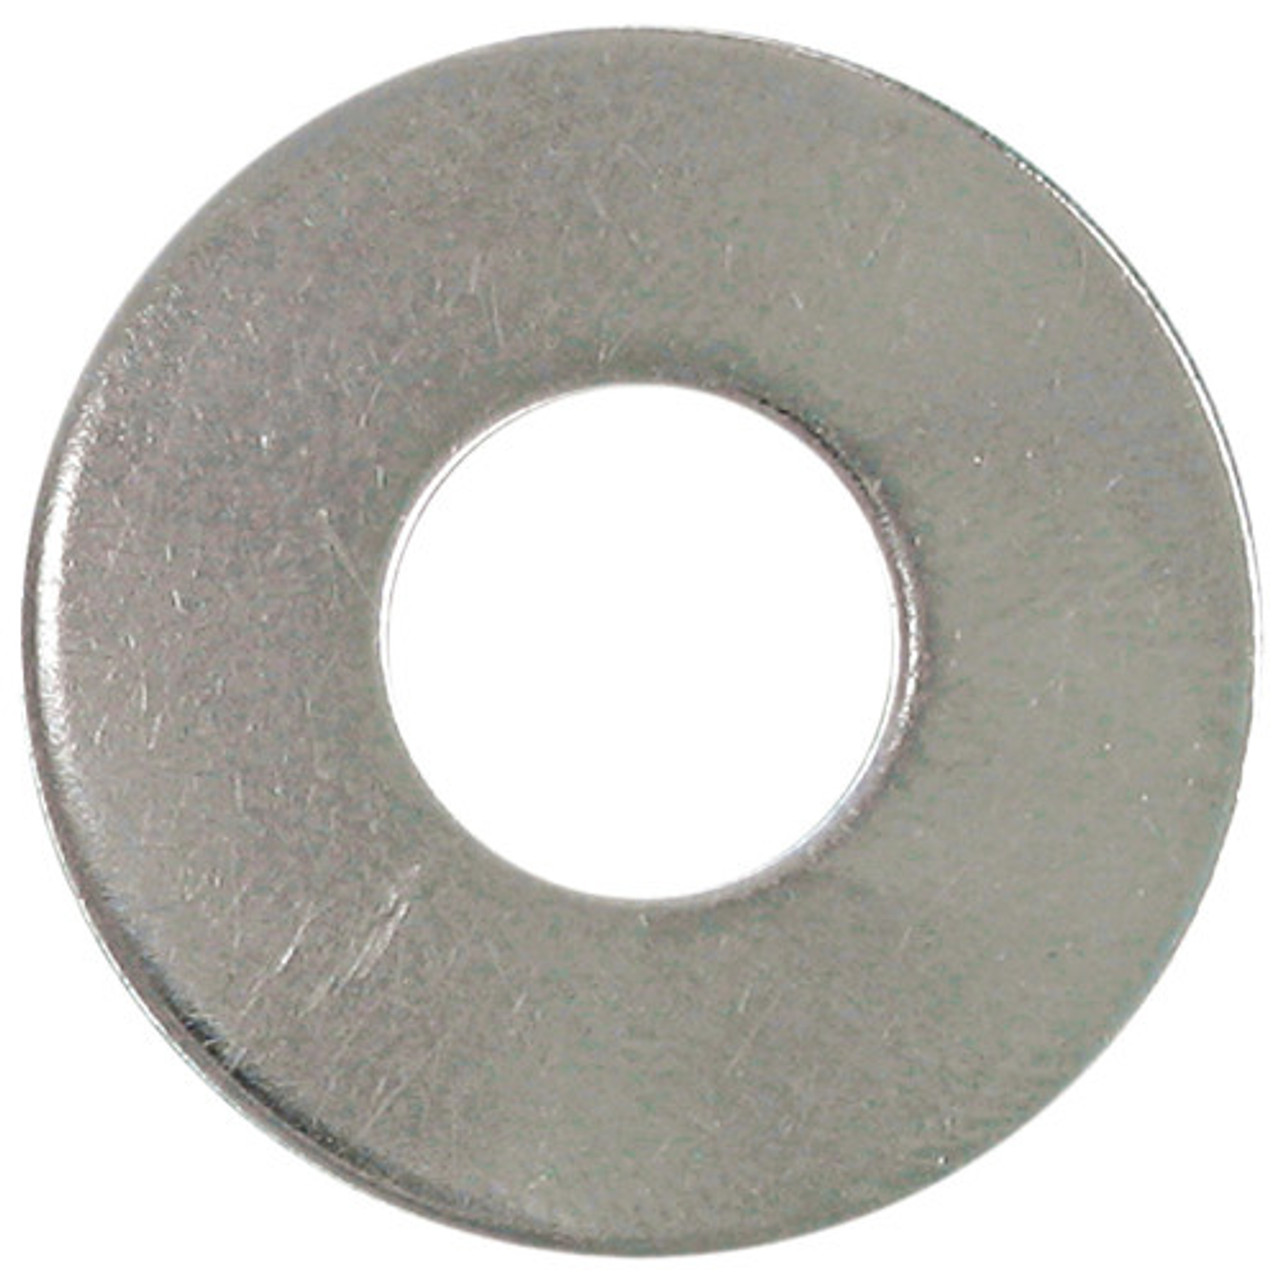 1/2" Zinc Plated Spacer Washer 100 Pc.   162-922